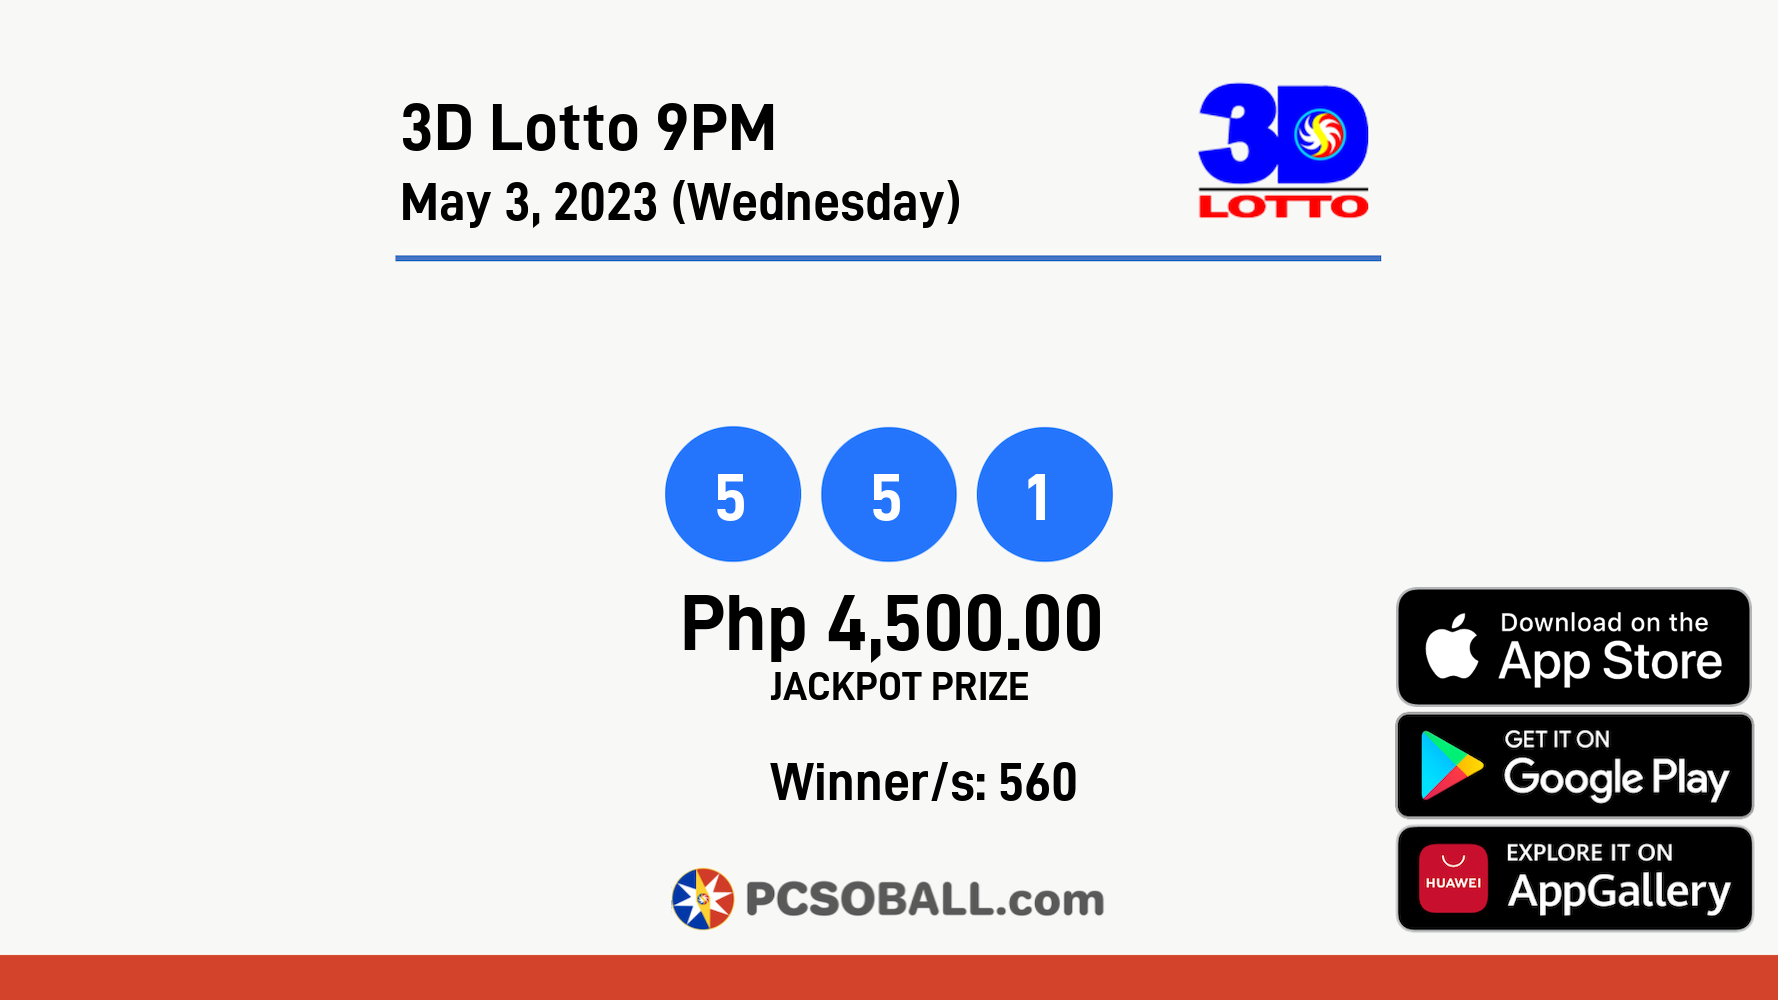 3D Lotto 9PM May 3, 2023 (Wednesday) Result